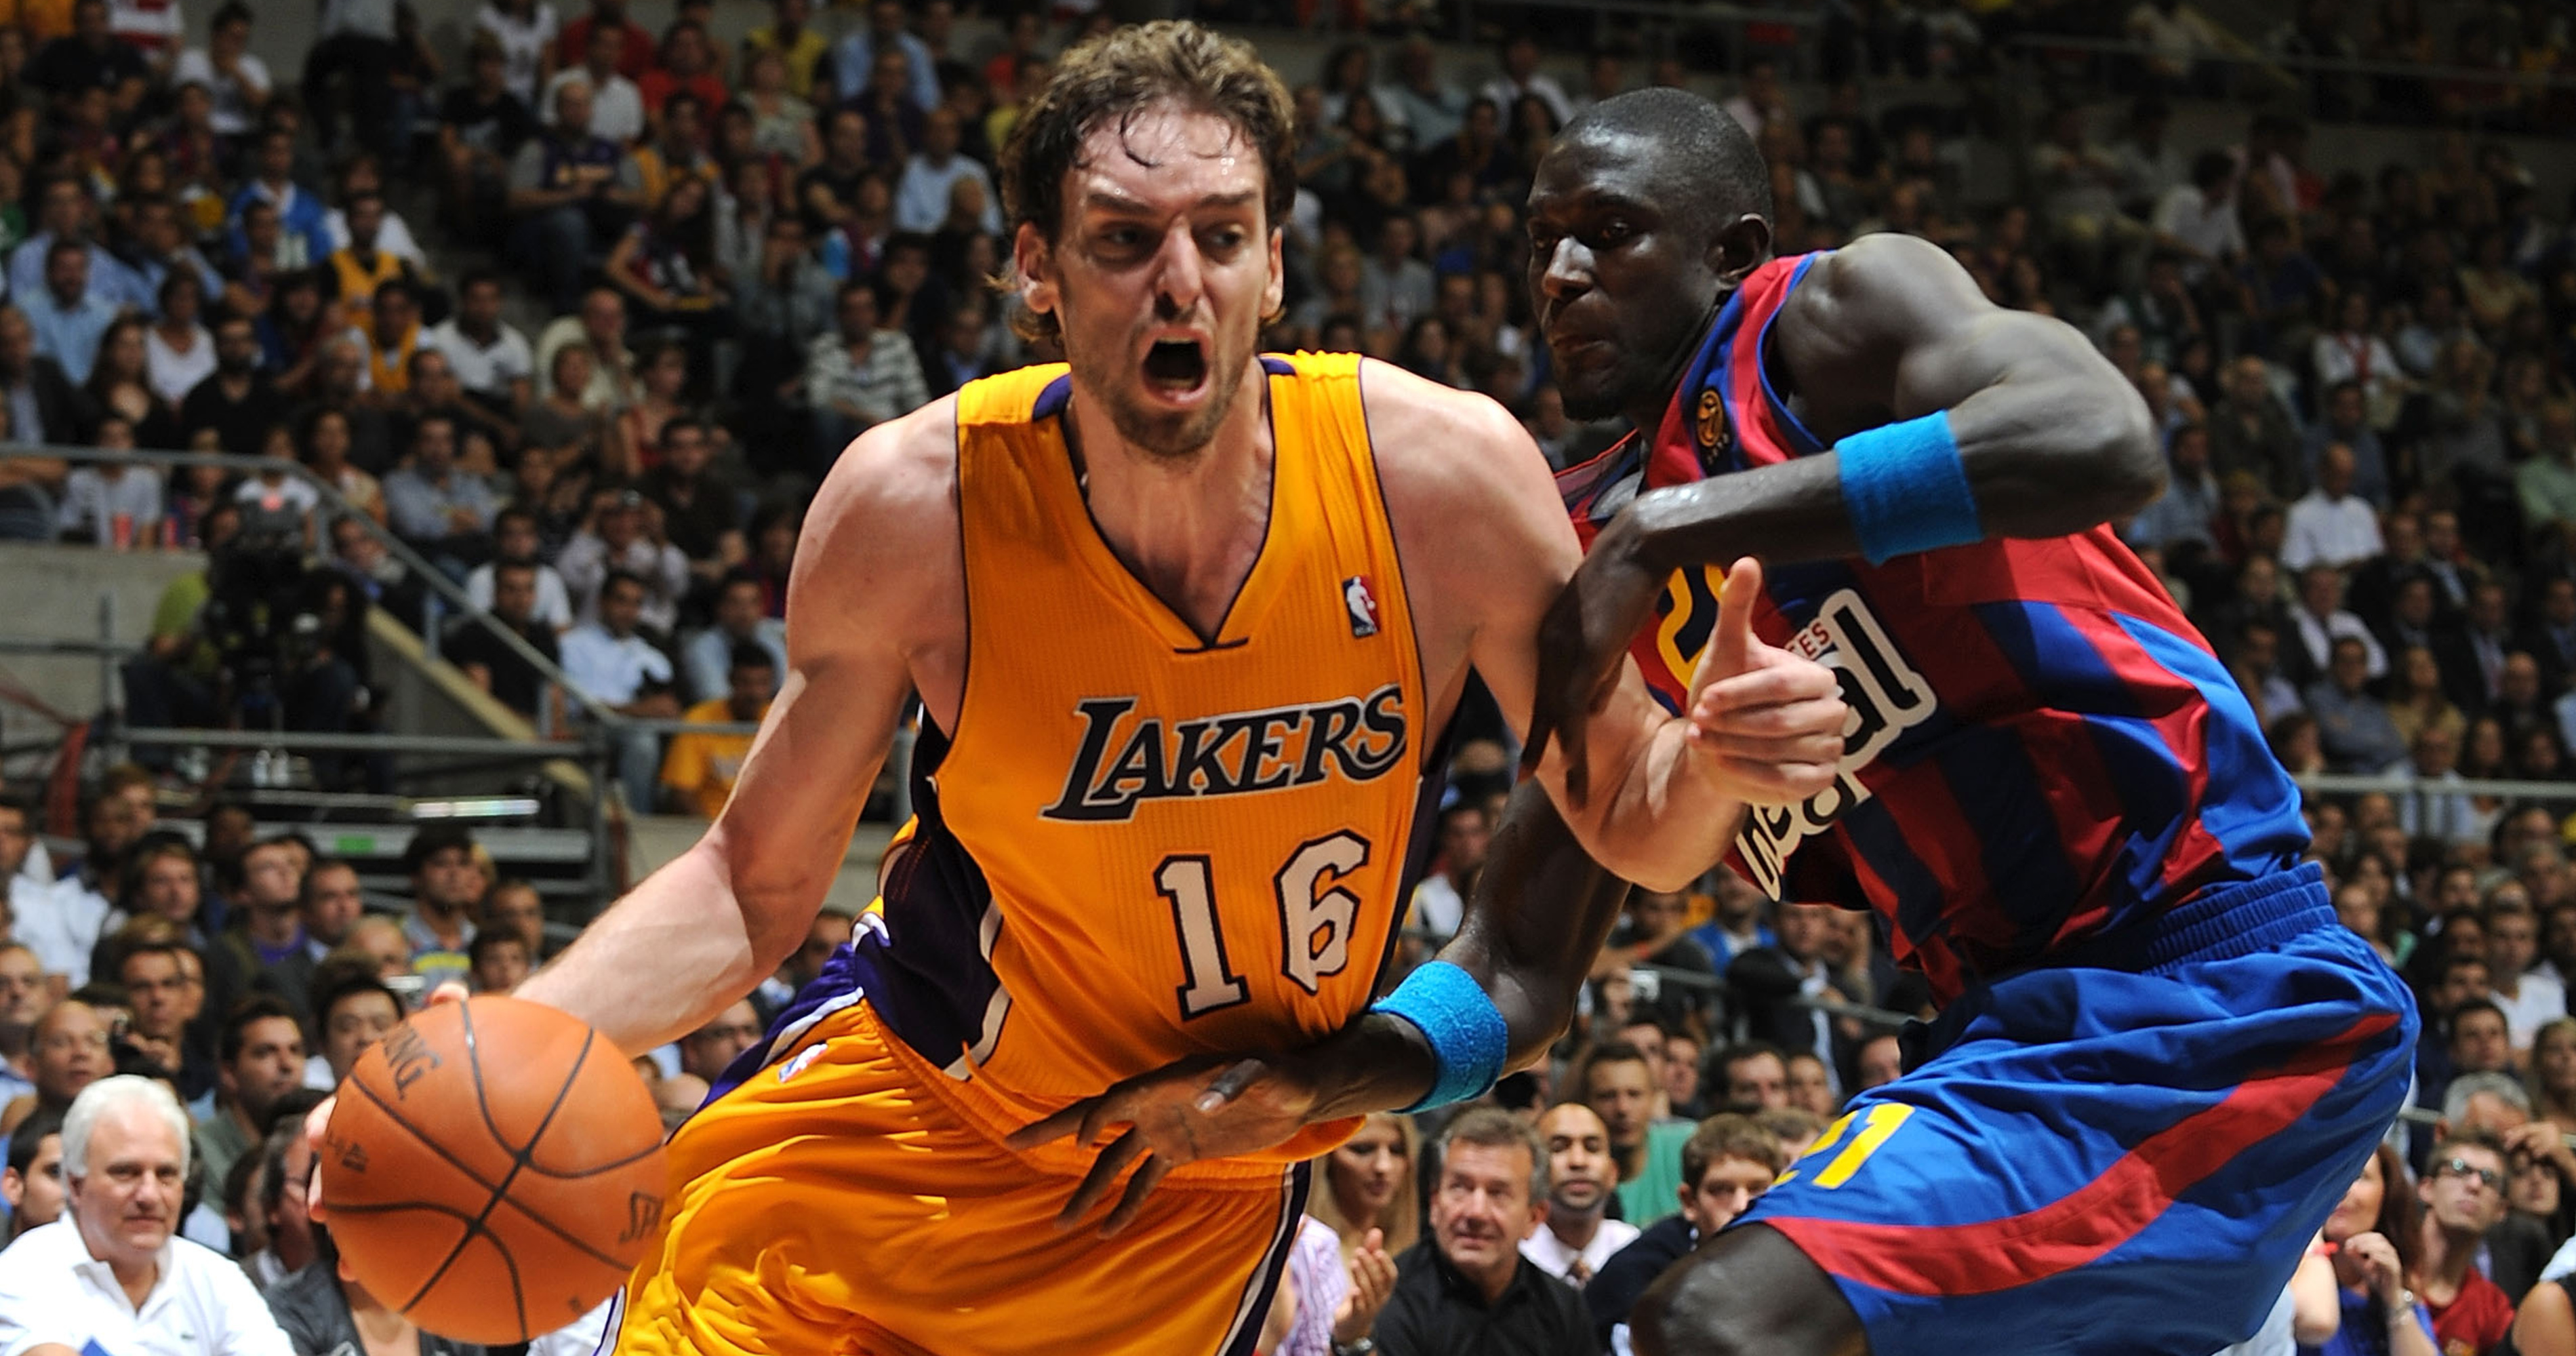 Lakers officially retire Pau Gasol's No. 16 jersey next to Kobe Bryant's